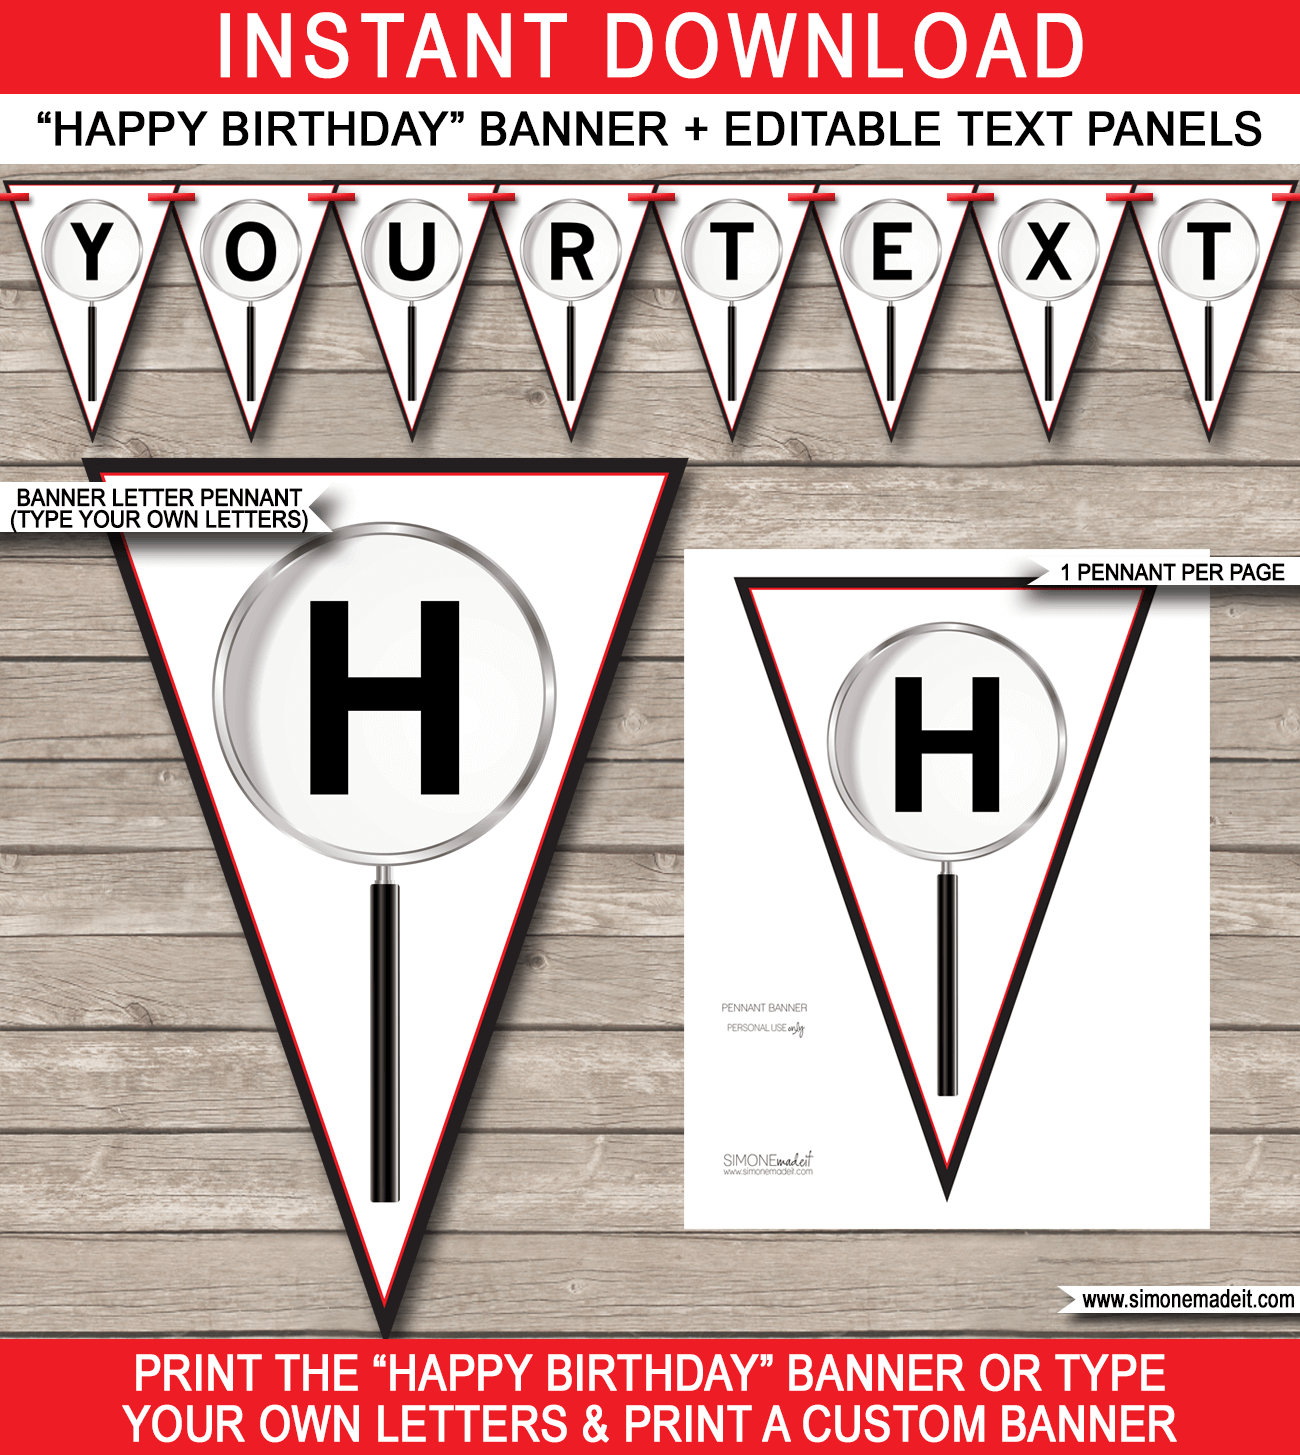 Printable Spy Party Pennant Banner Template - Birthday Party Decorations - Happy Birthday Bunting - Secret Agent - DIY Editable Text - INSTANT DOWNLOAD via simonemadeit.com